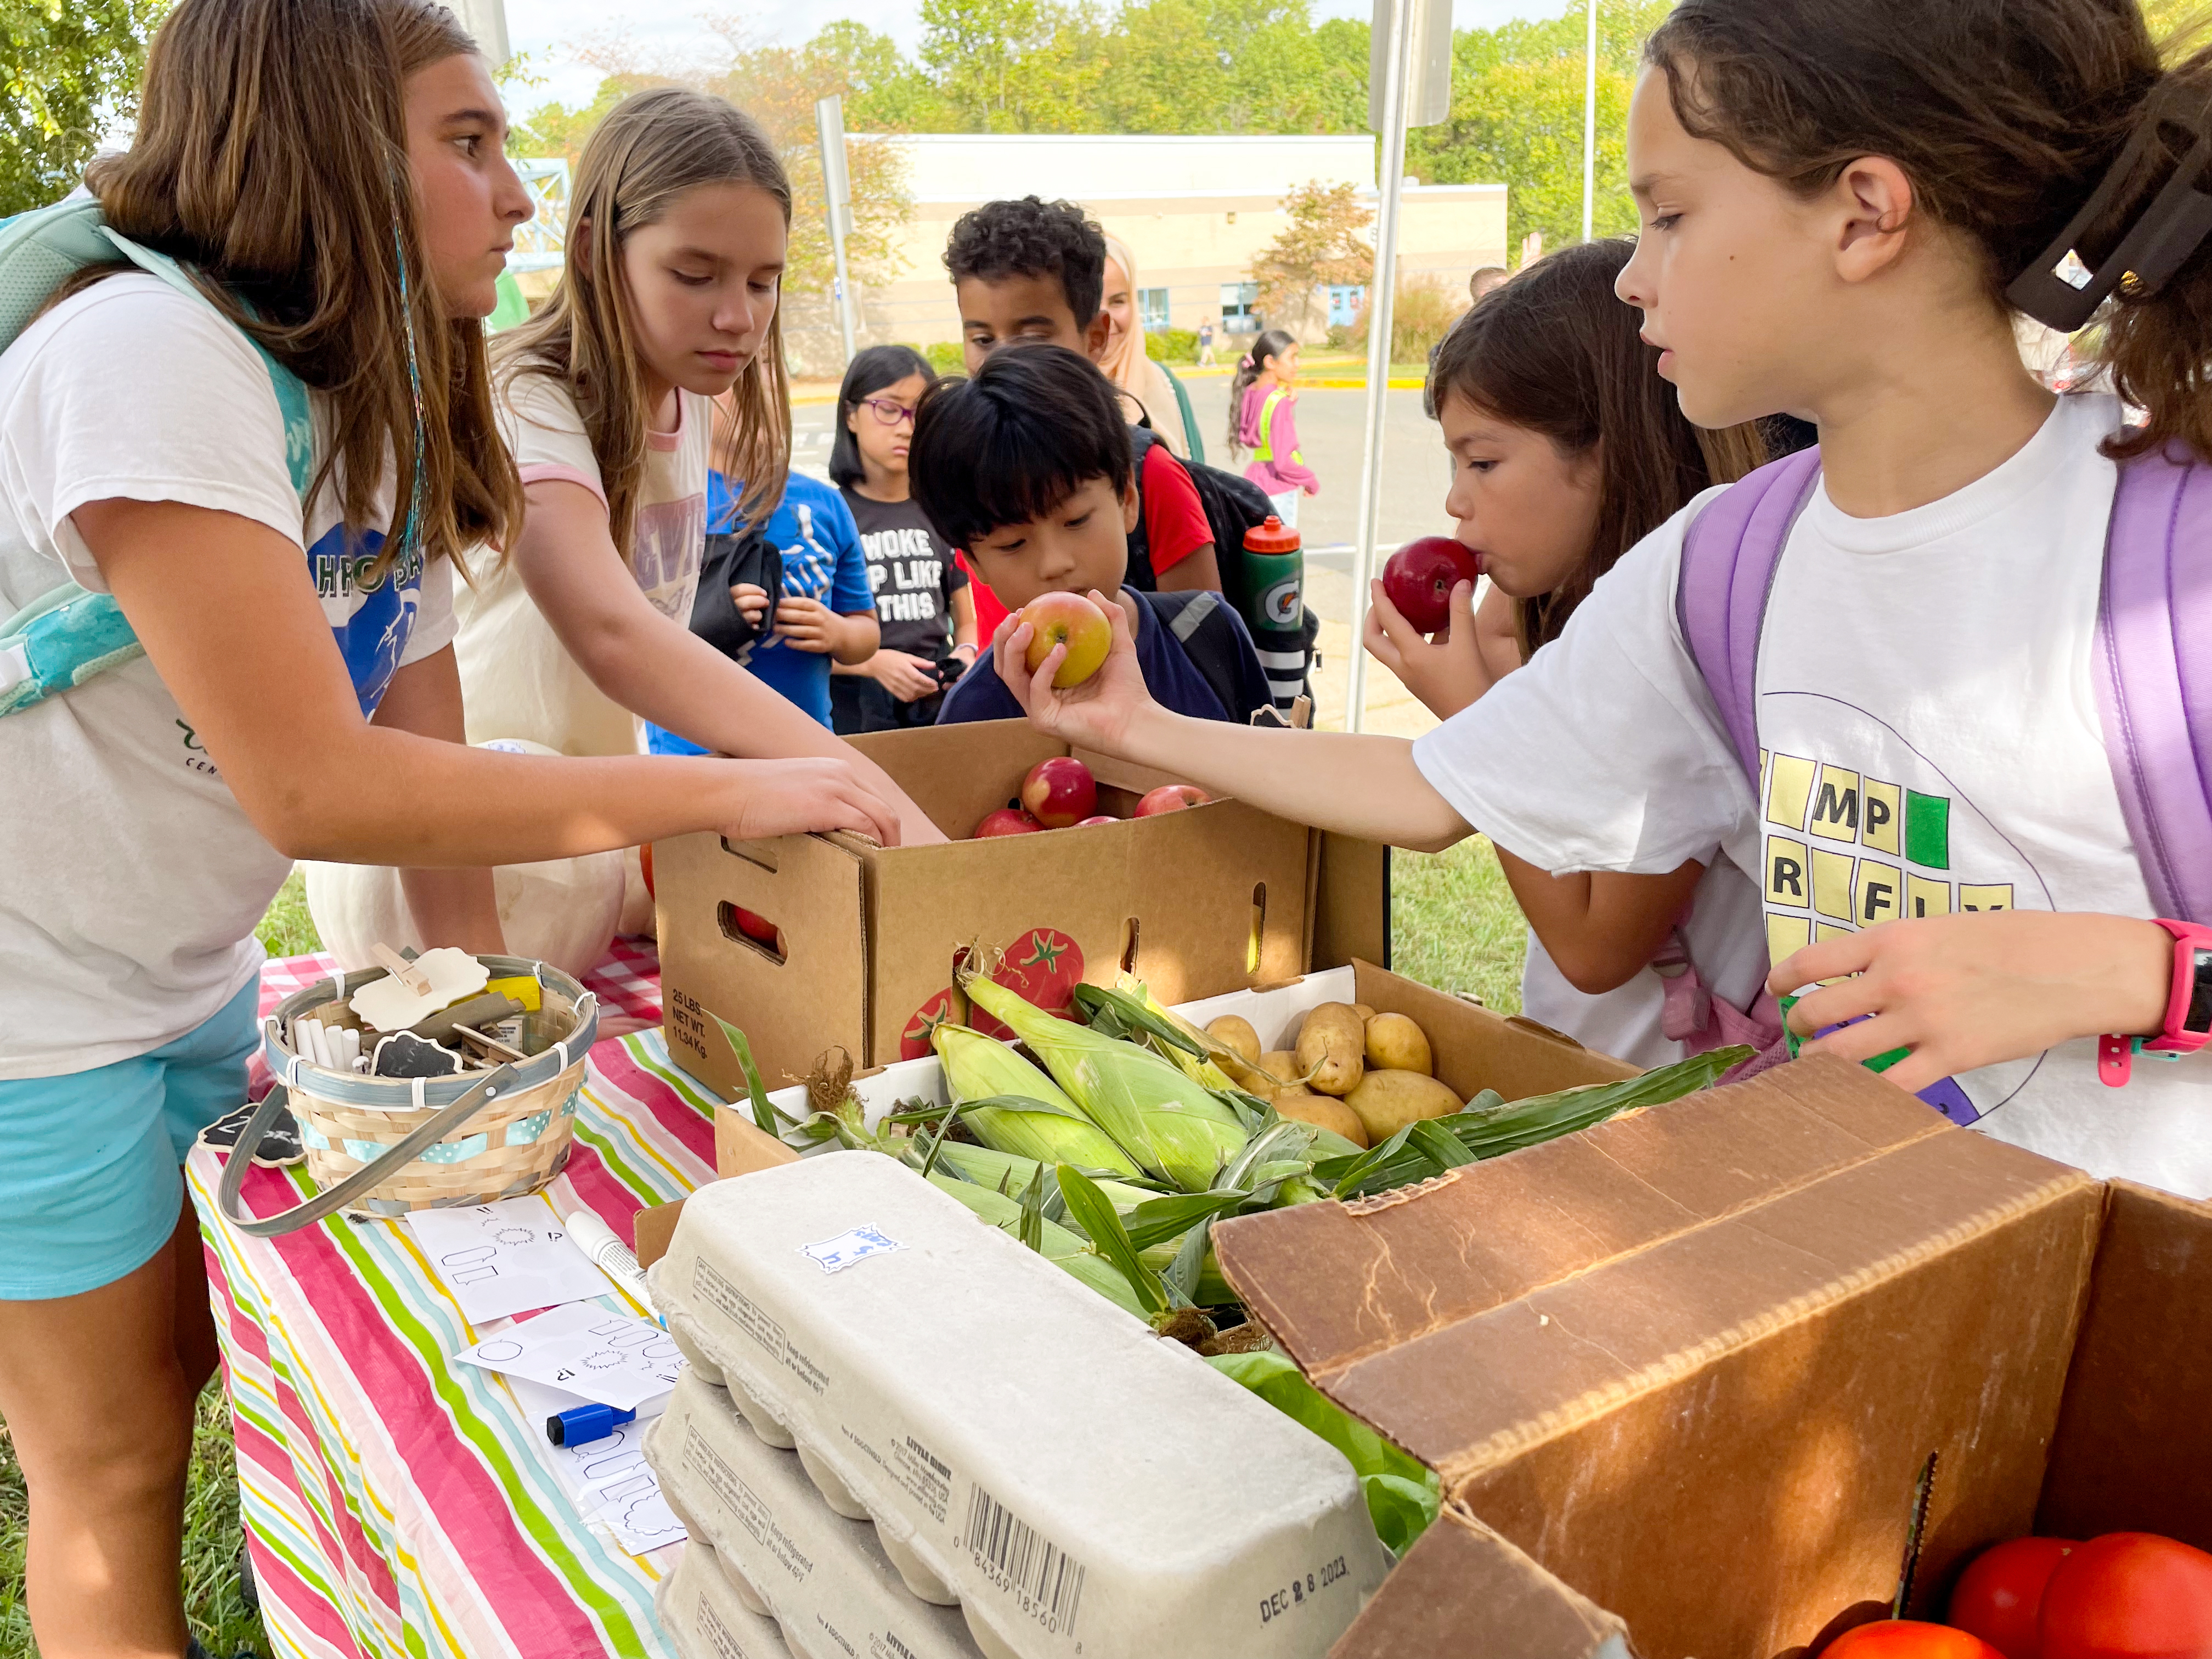 Apples are the favorite item for students at both farmers markets at Centreville Elementary and Willow Springs Elementary.